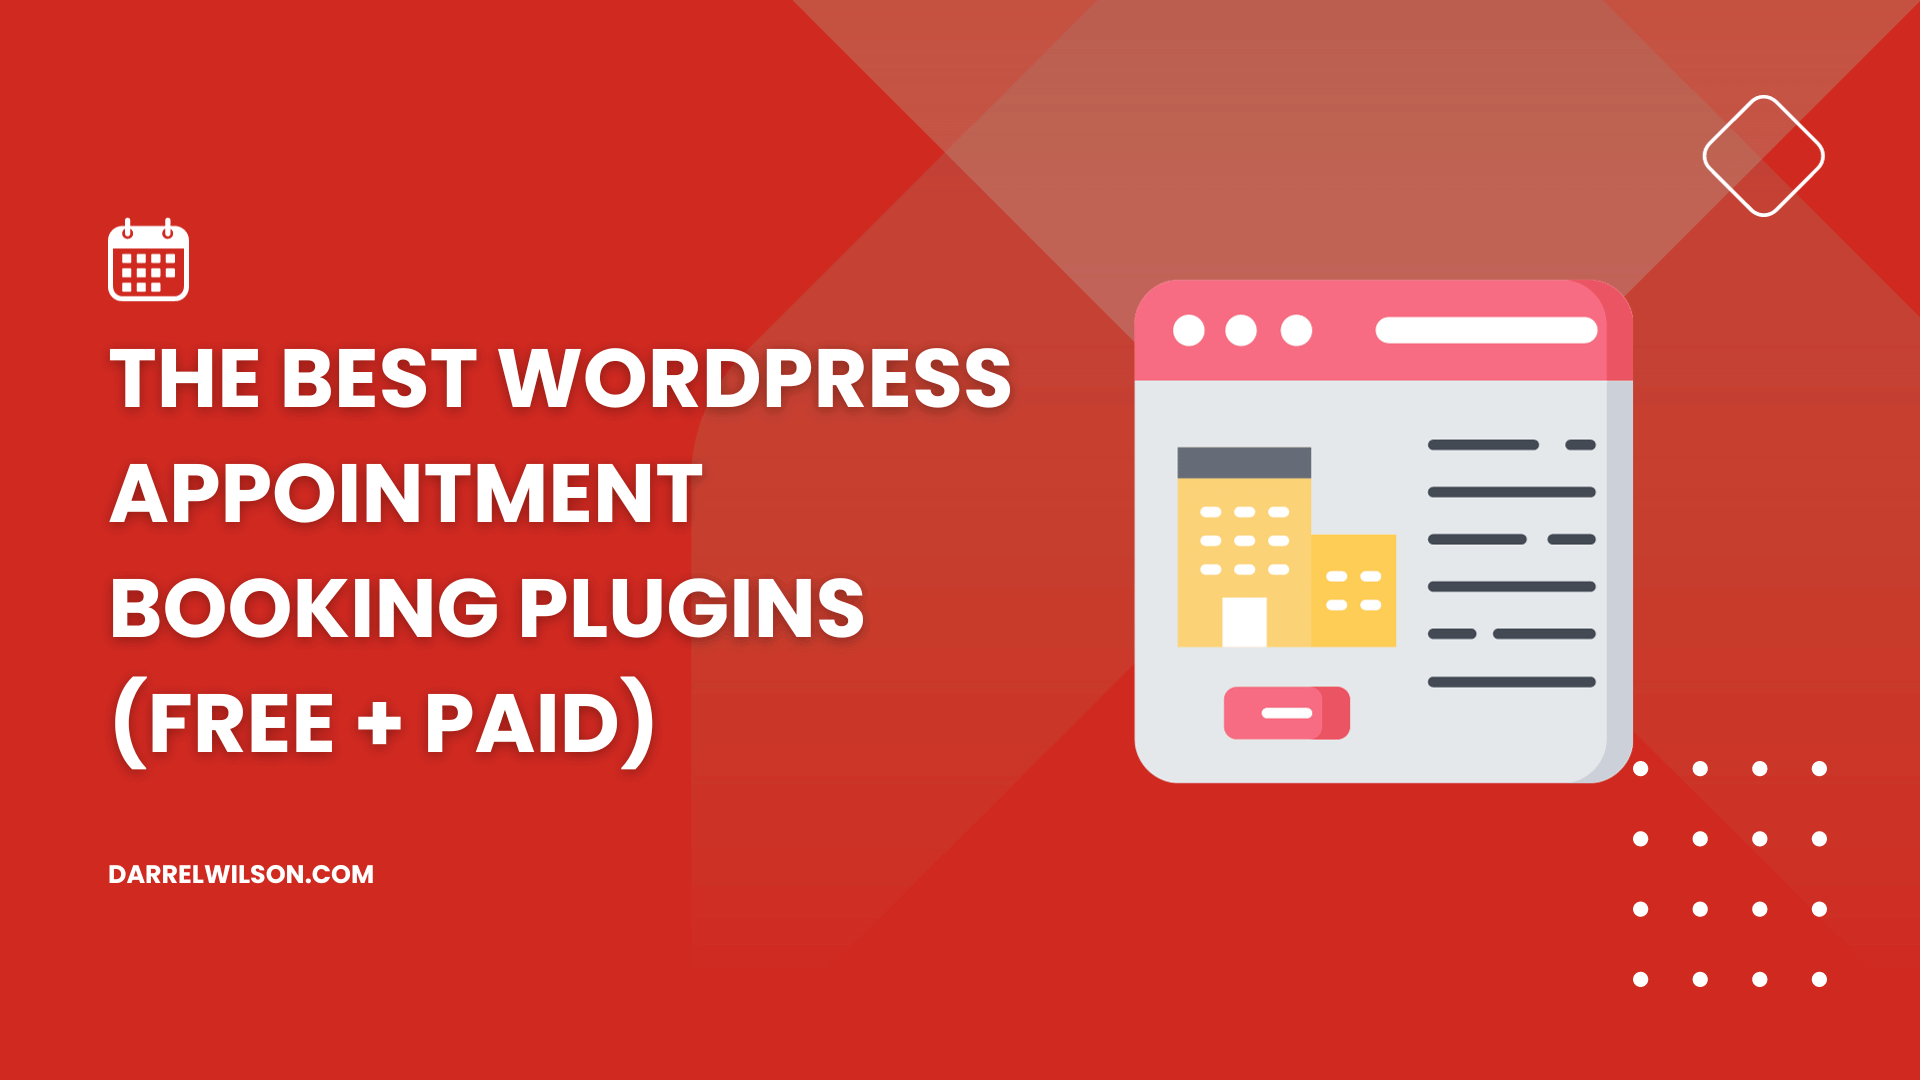 The Best WordPress Appointment Booking Plugins (Free + Paid)